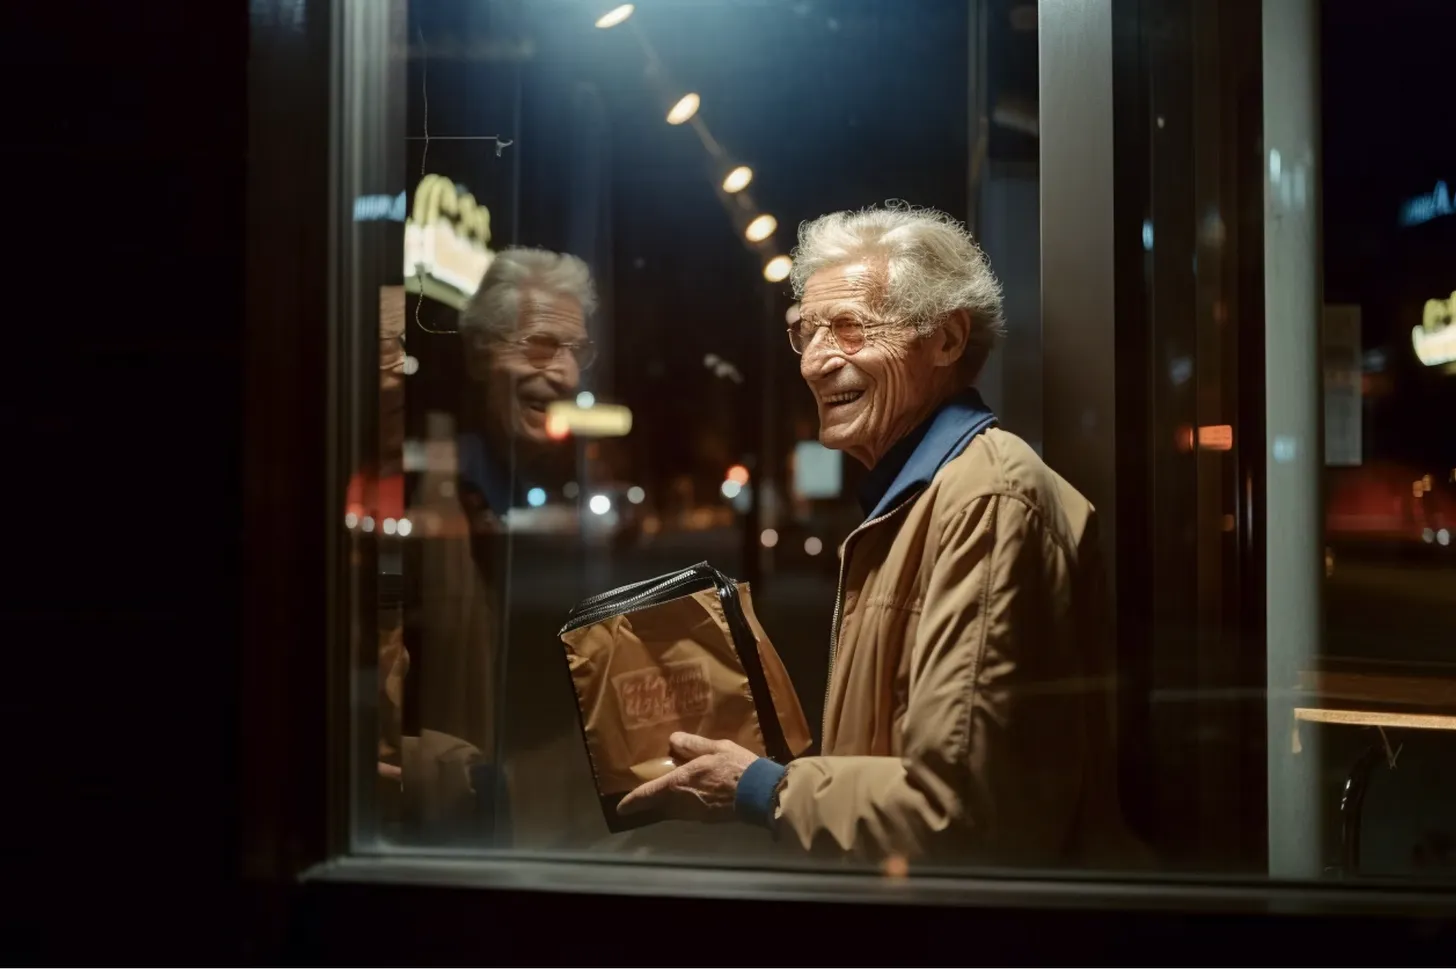 Another photo of a man laughing into his reflection in a shop window at night.